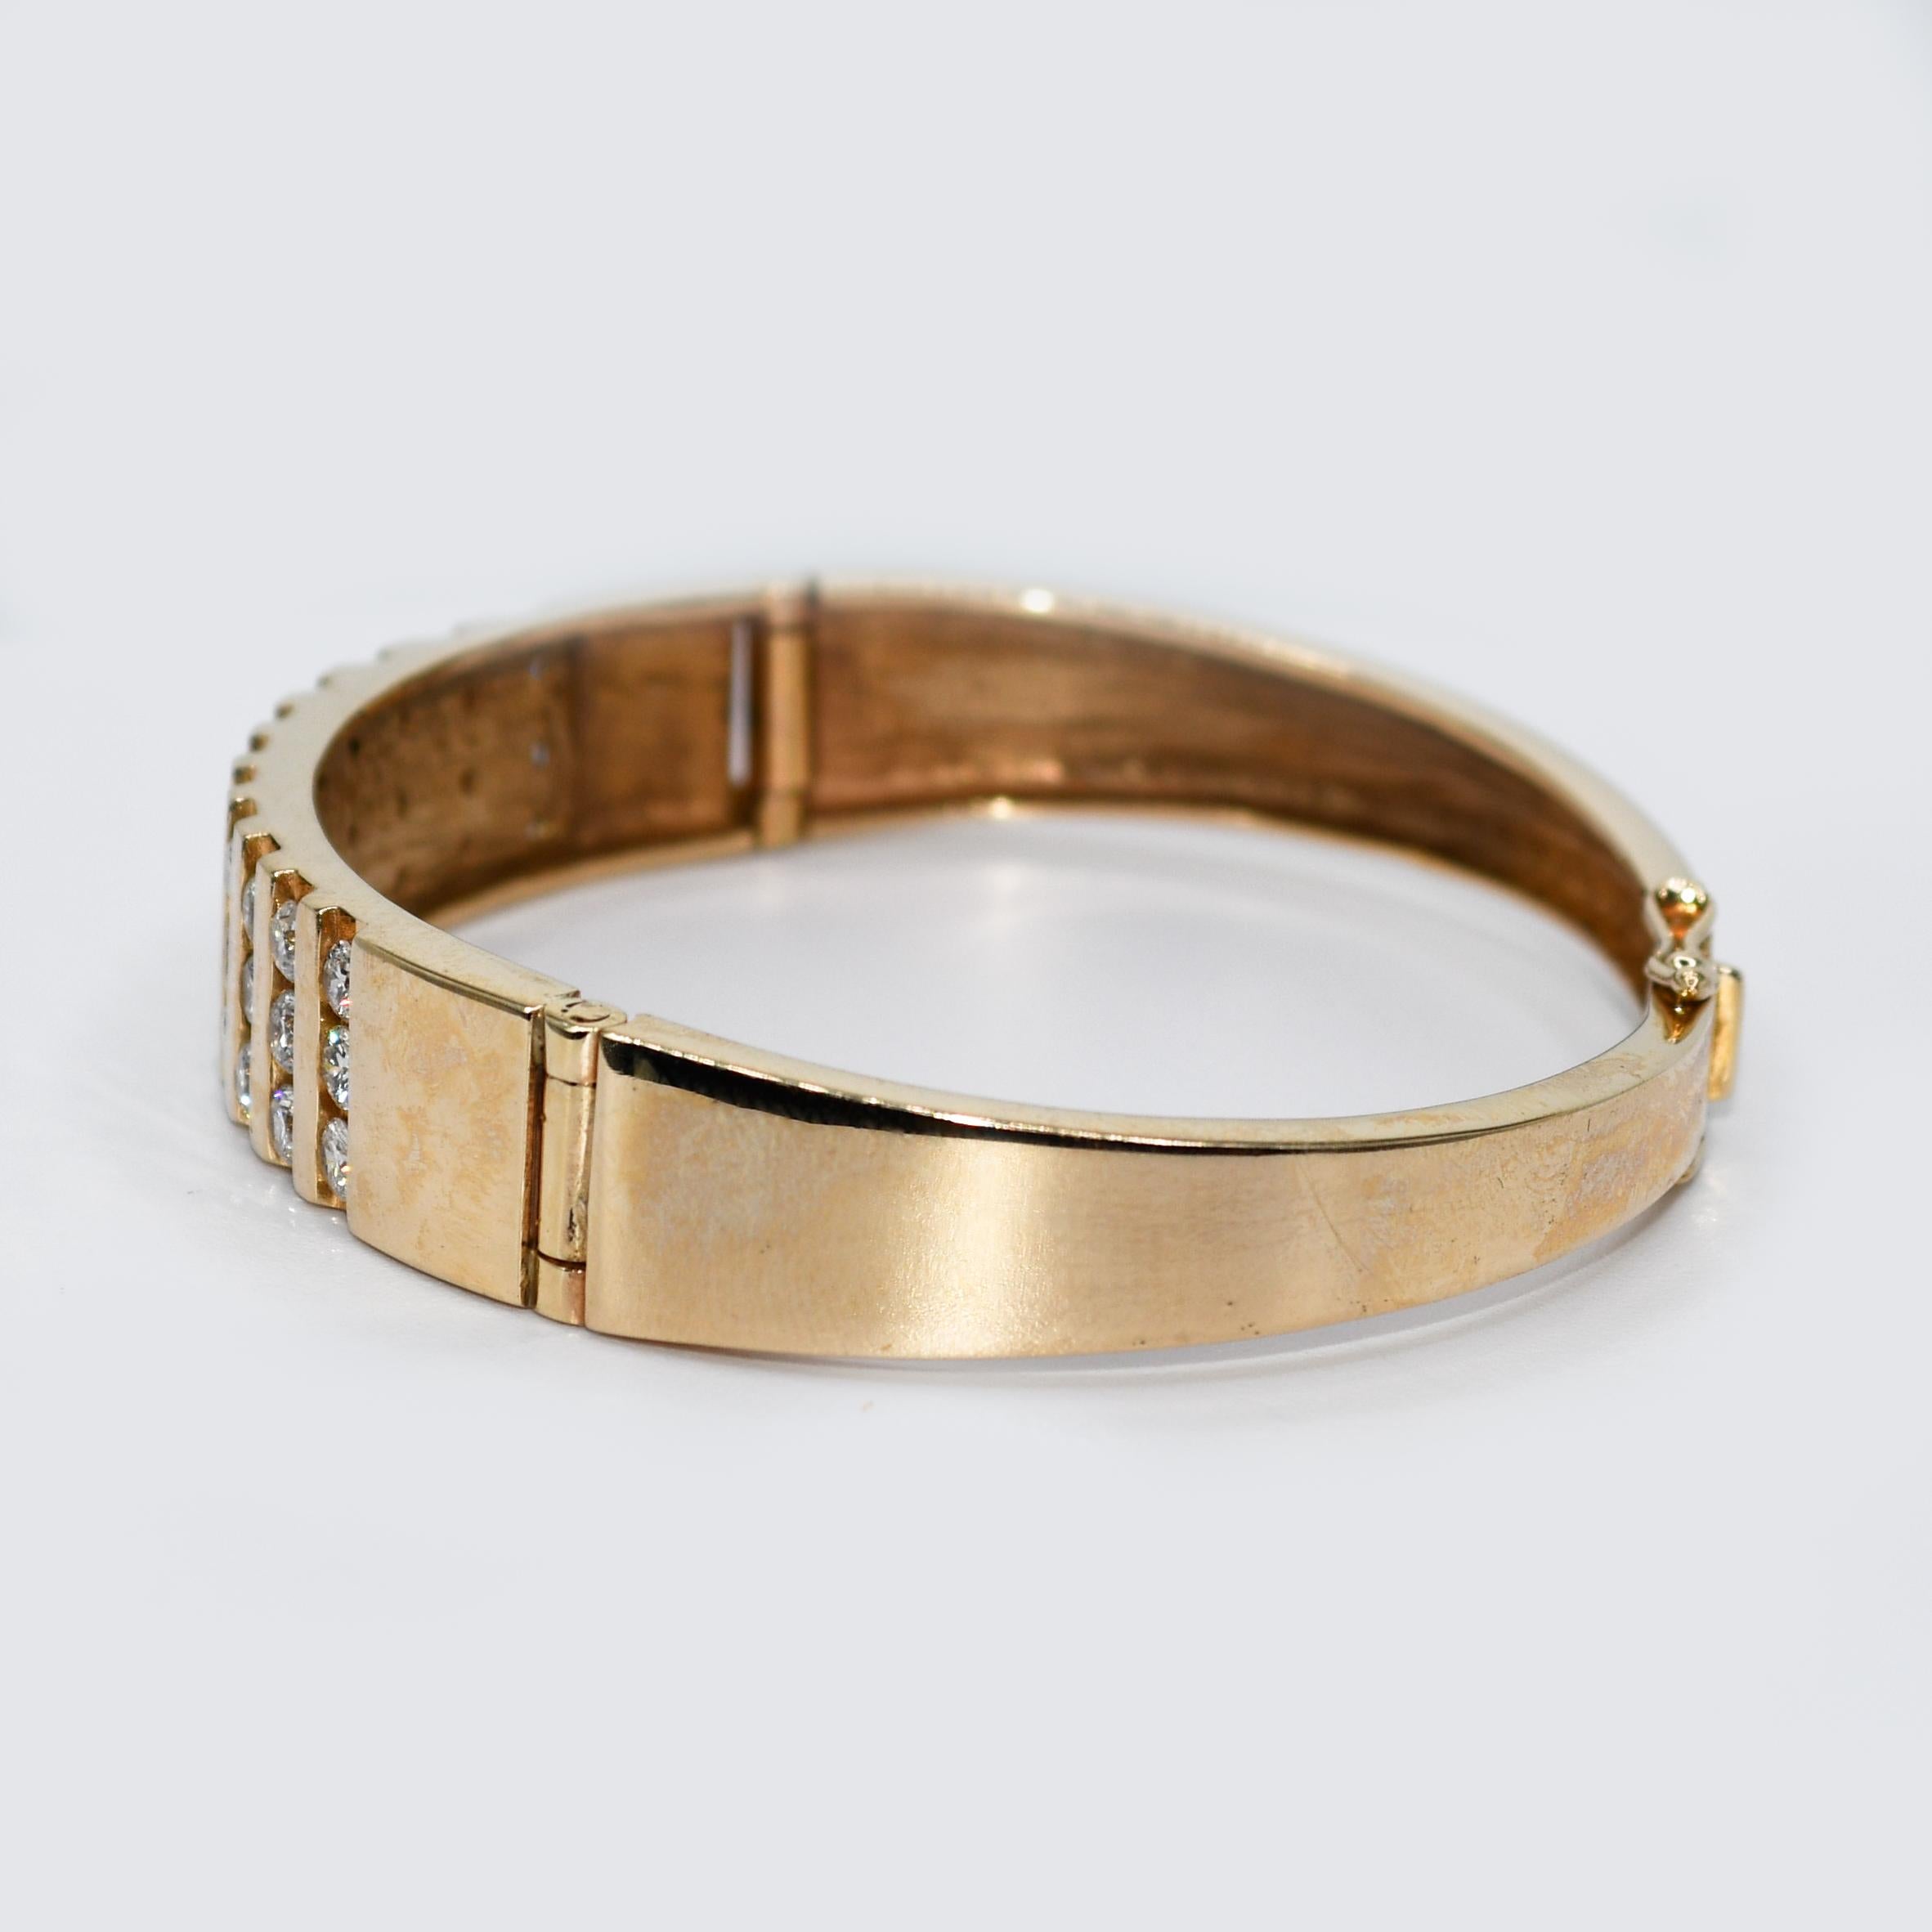 14K Yellow Gold Diamond Bangle Bracelet, 1.75TDW, 23.8g In Excellent Condition For Sale In Laguna Beach, CA